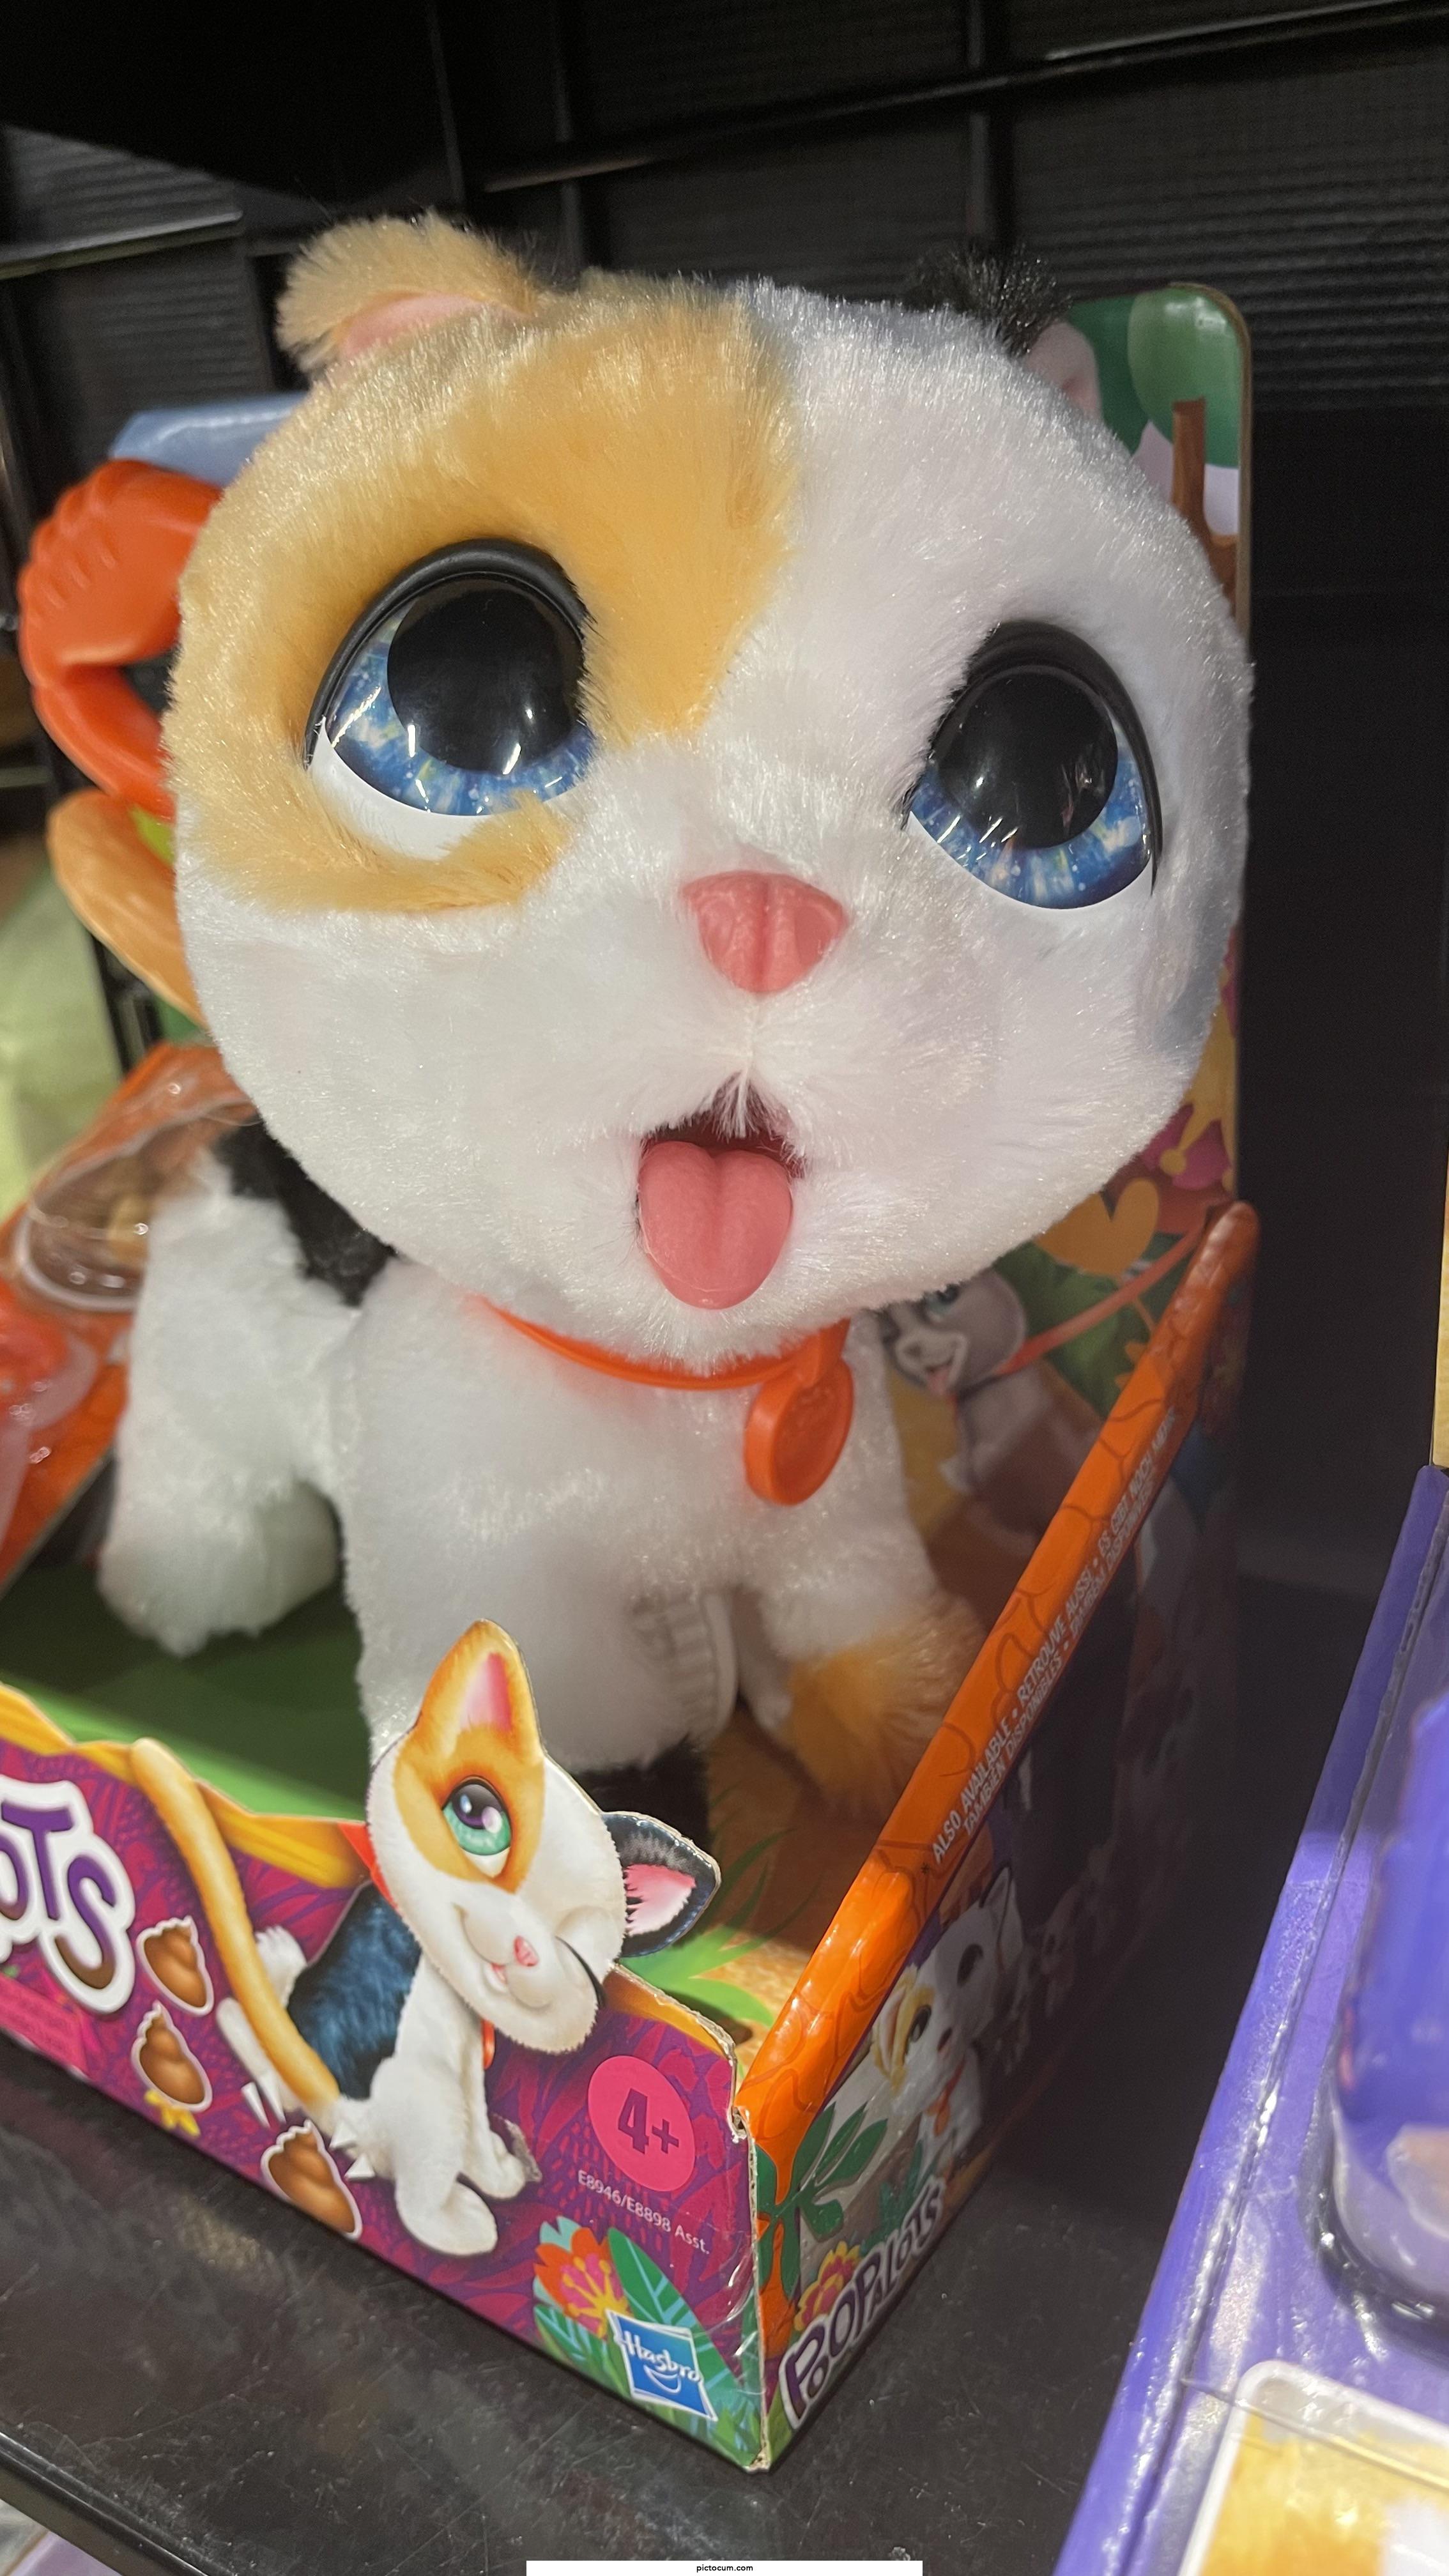 Children’s Toy I Found at the Mall